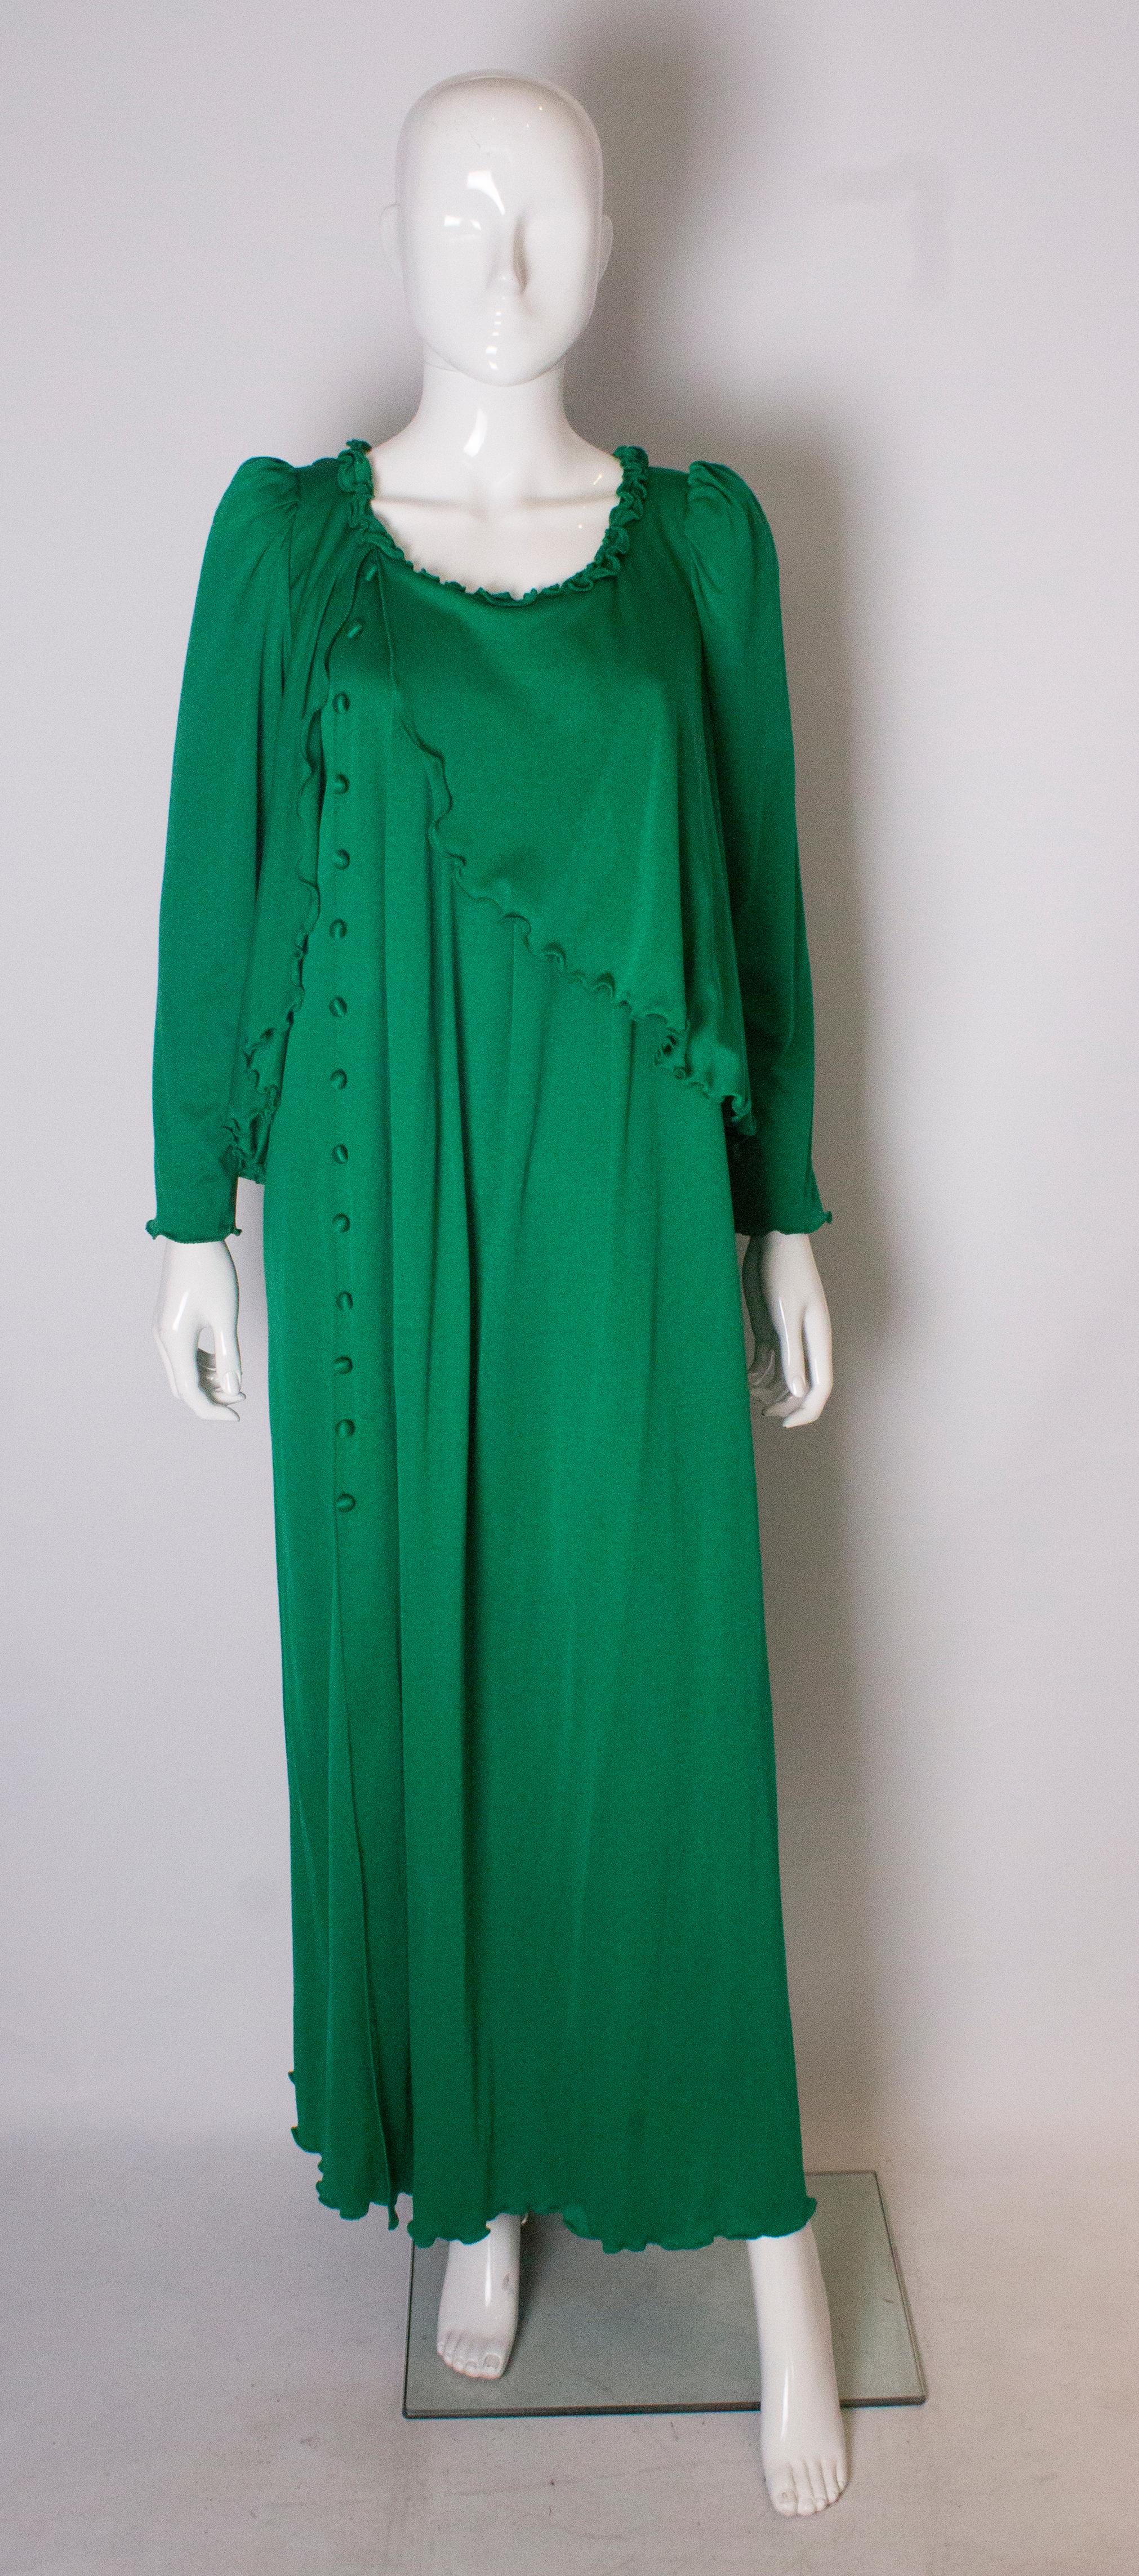 A great gown for Fall. In a vibrant green colour, this dress has elbow length sleeves with a frill edge, a fake capelet and 25'' slit at the front.
It has decorative buttons at the front and a central back zip.